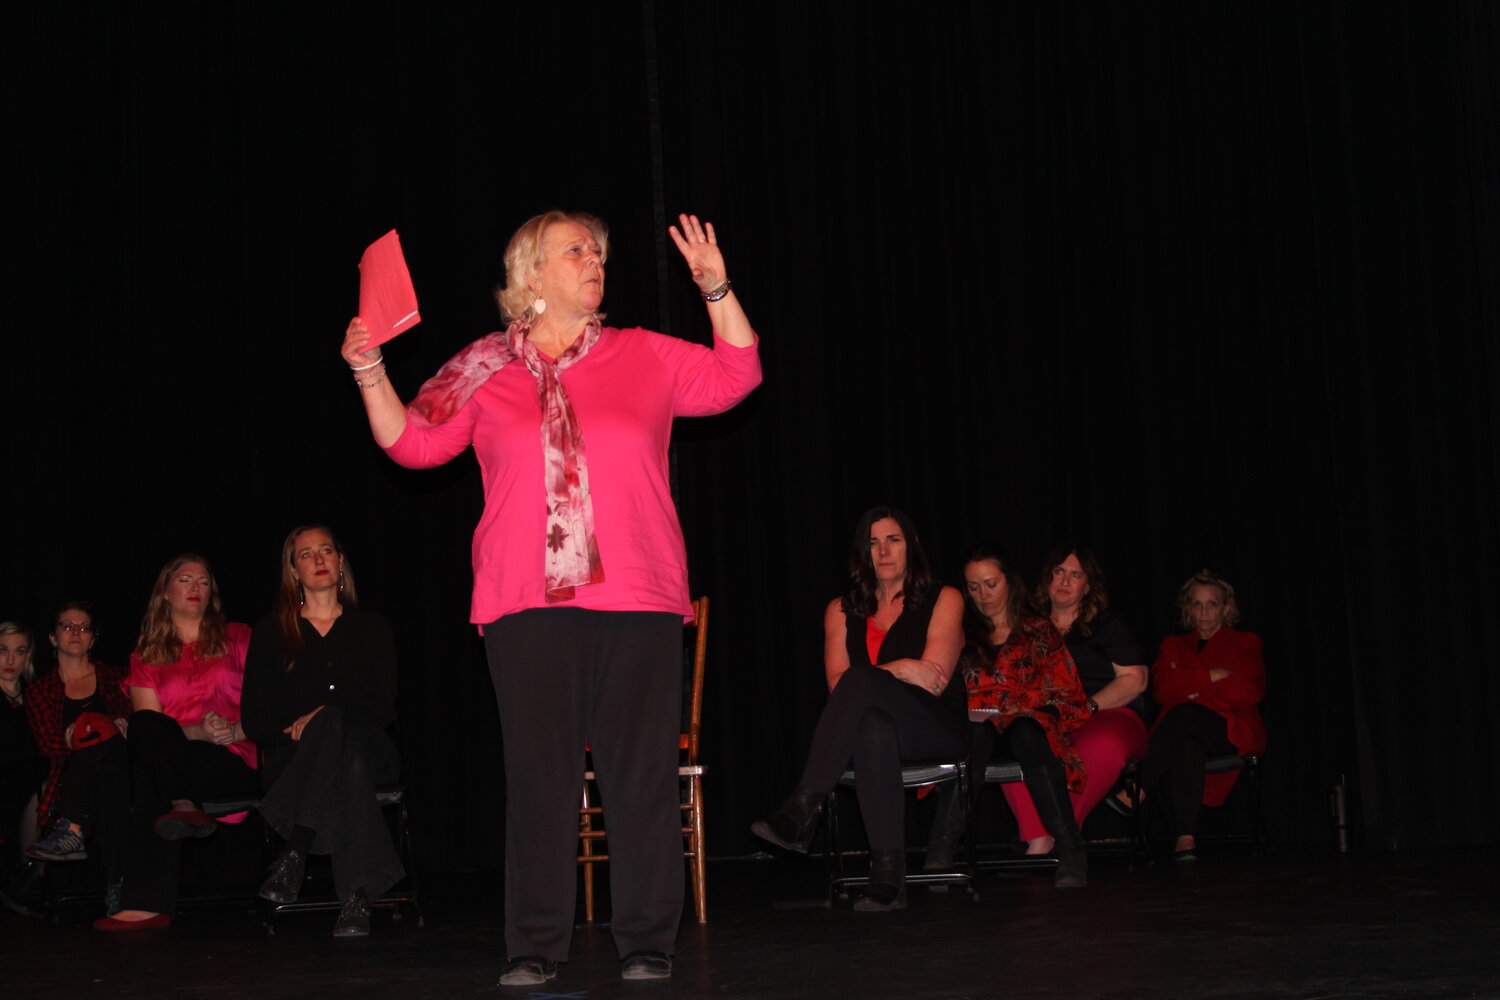 Evanston’s Patricia Arnold performs during “The Vagina Monologues,” presented by Soroptimist International of Evanston on Saturday, Feb. 24, at the Strand Theatre.